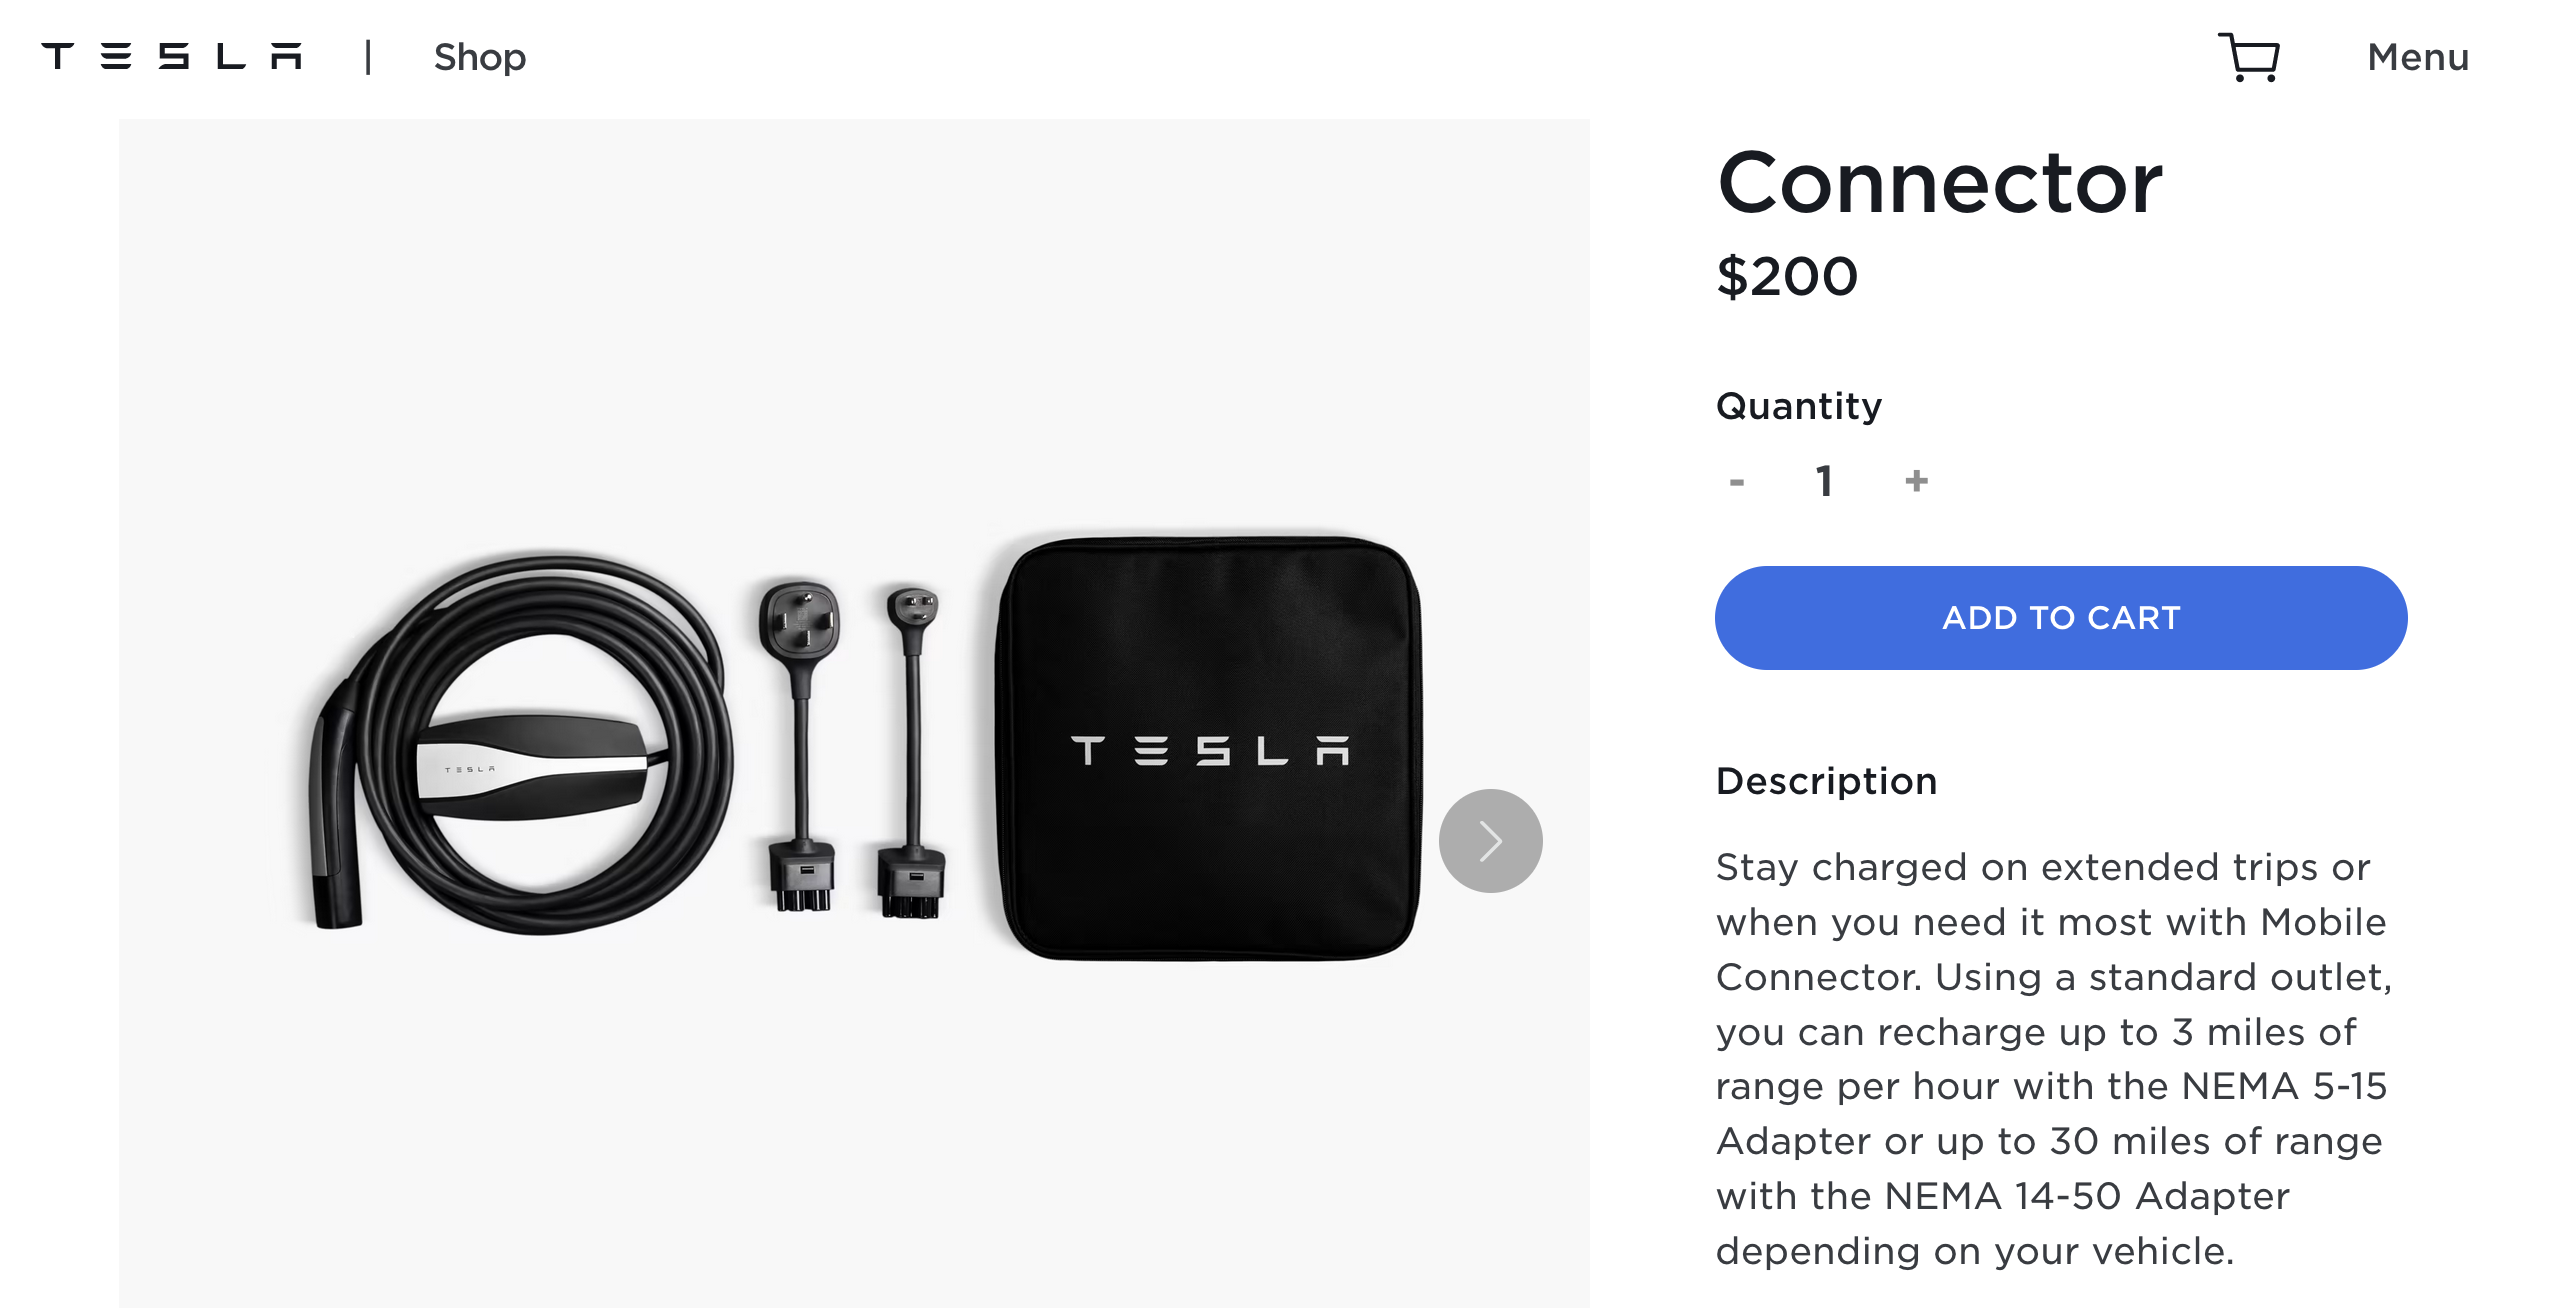 Tesla Mobile Connector with NEMA Adapters Back in Stock - TeslaNorth.com